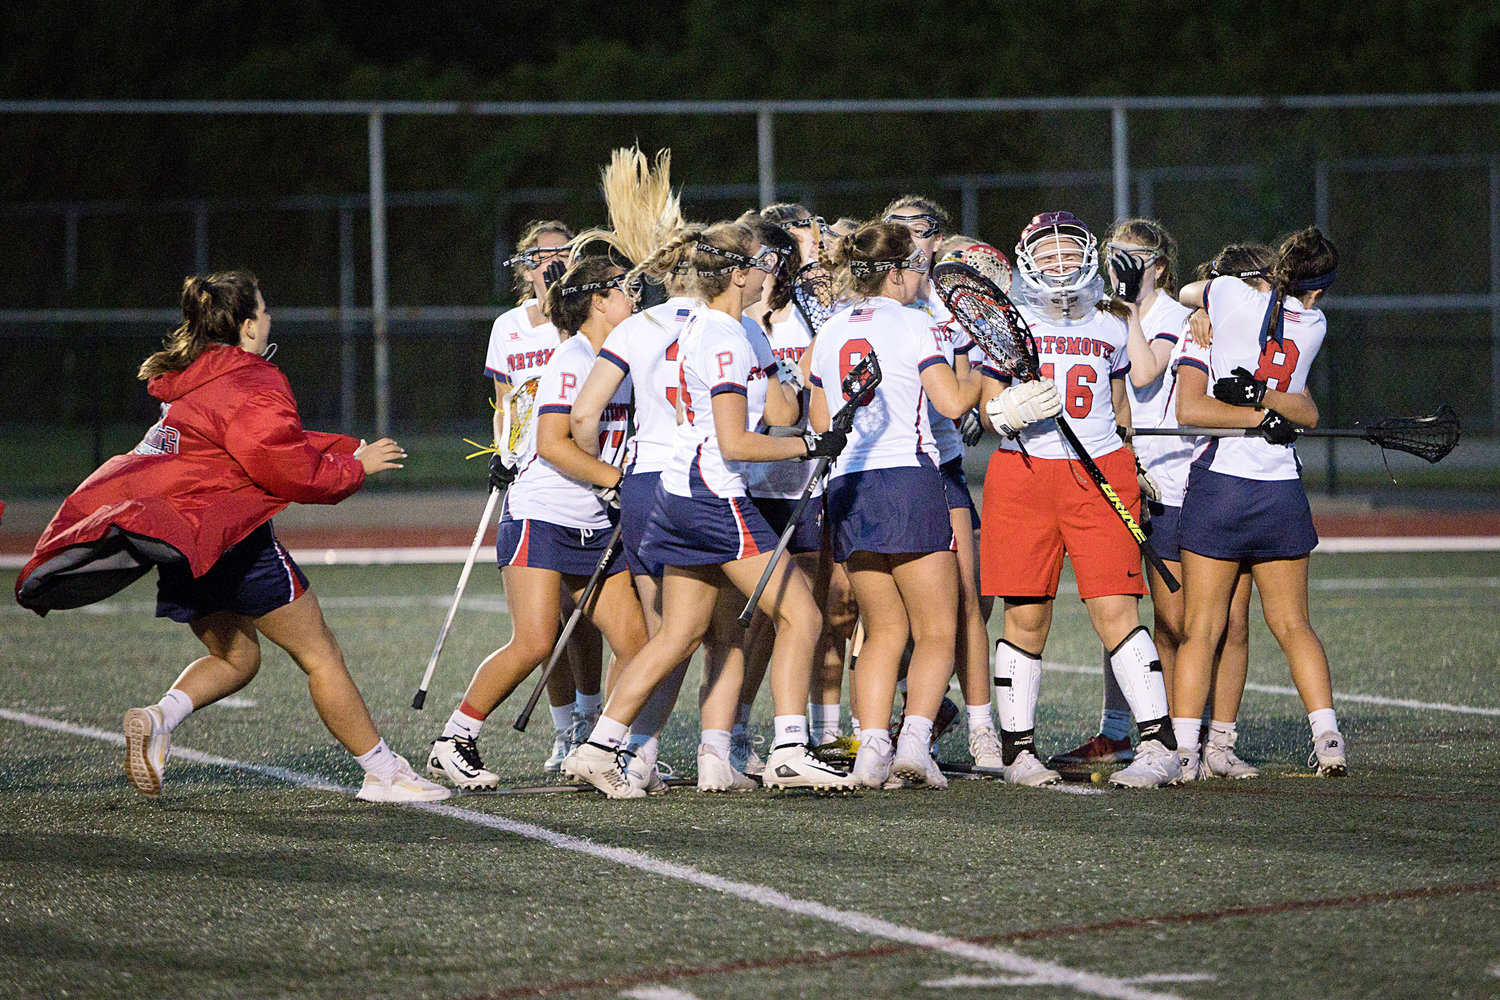 The Patriots surround goalie Emmy O'Connor after coming back to win, 15-14, in the Division II semifinals against Cranston West.